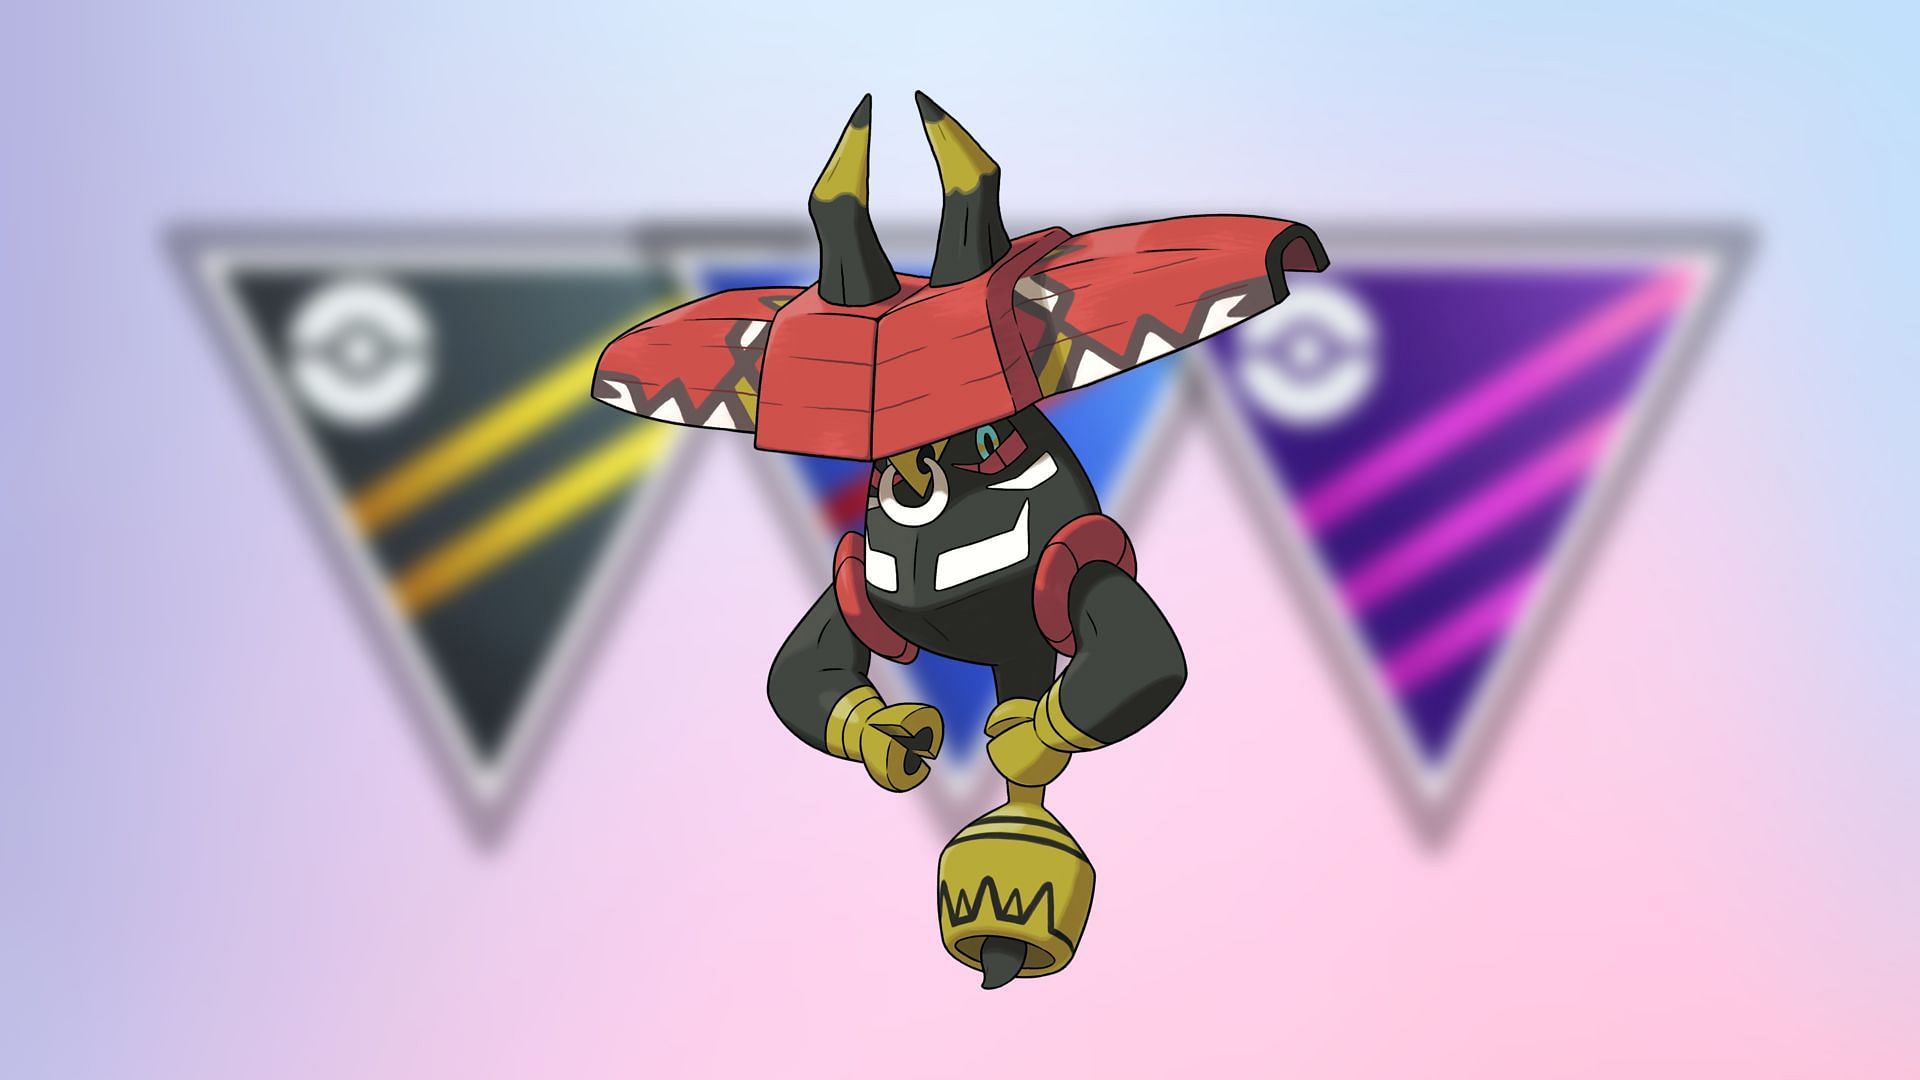 Tapu Bulu is an above-average PvP and PvE pick in Pokemon GO (Image via TPC)